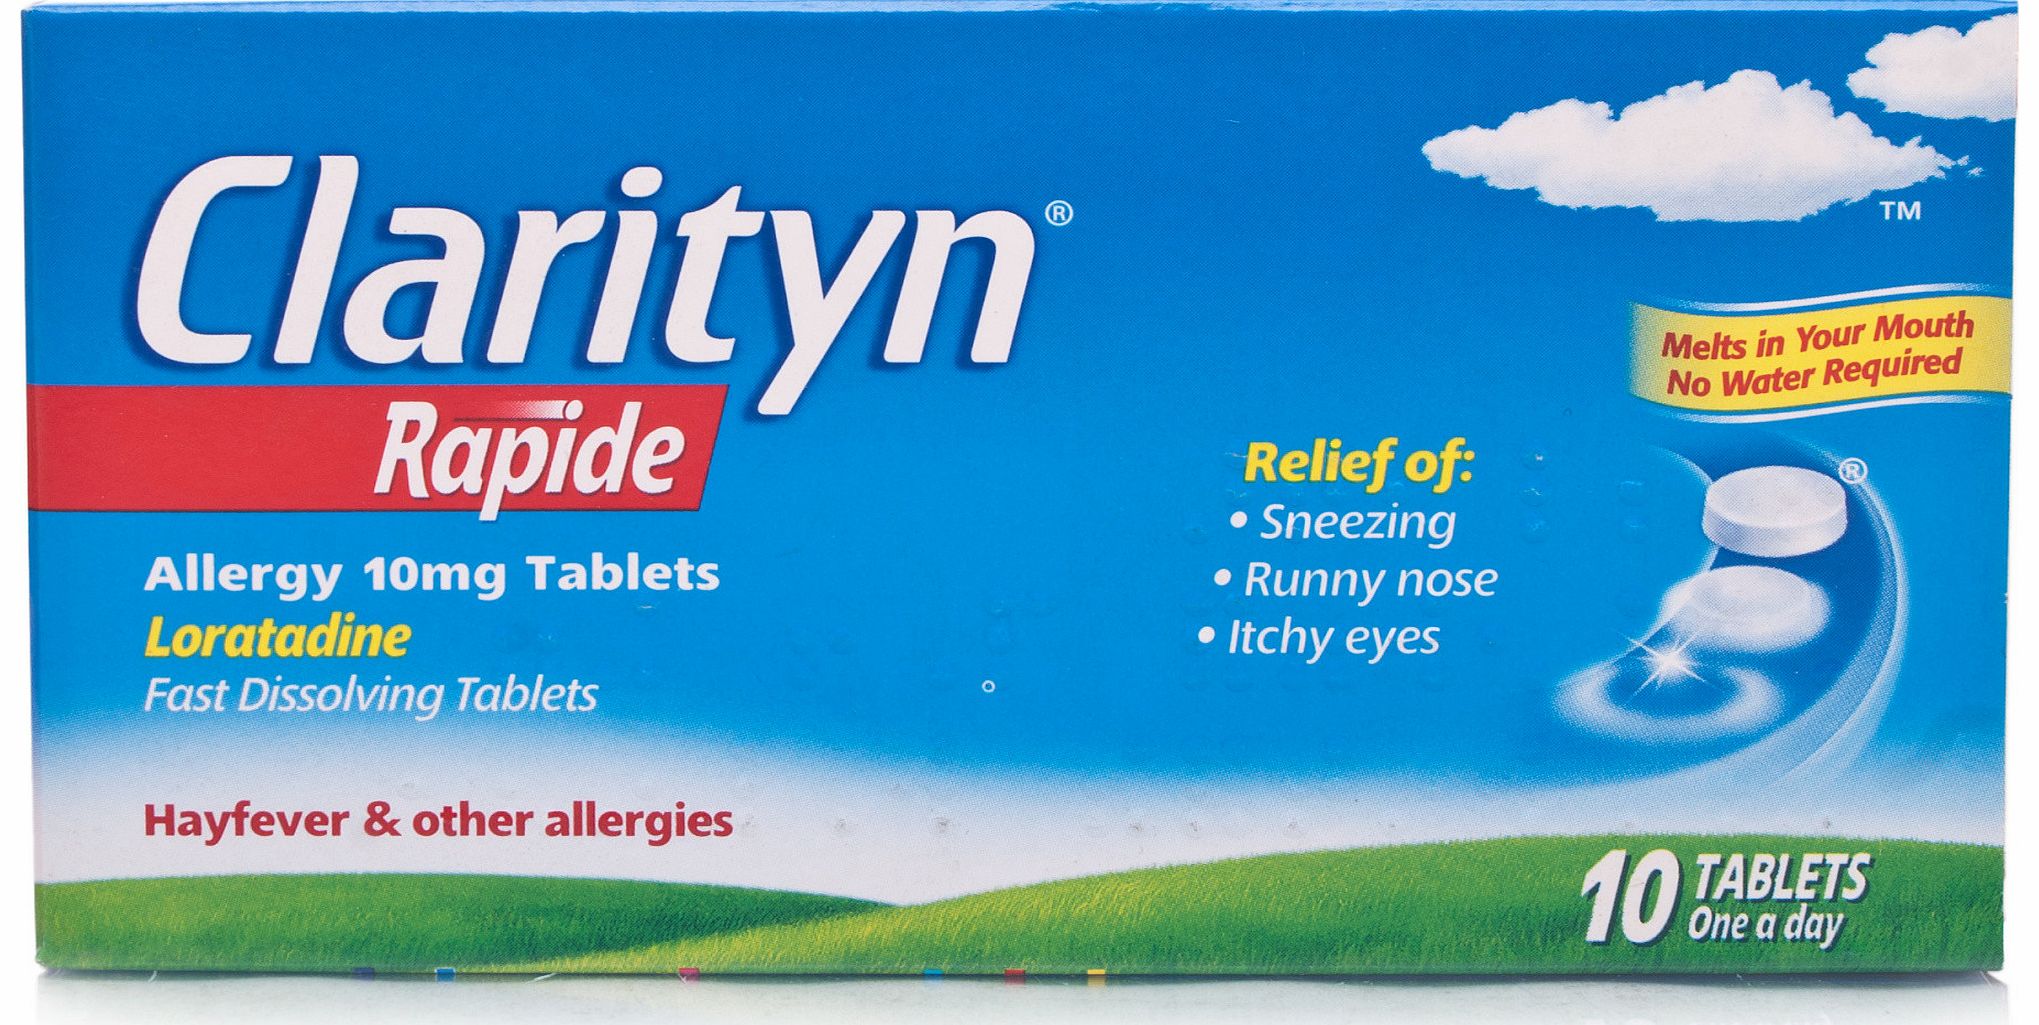 Clarityn Rapide Allergy 10mg Tablets